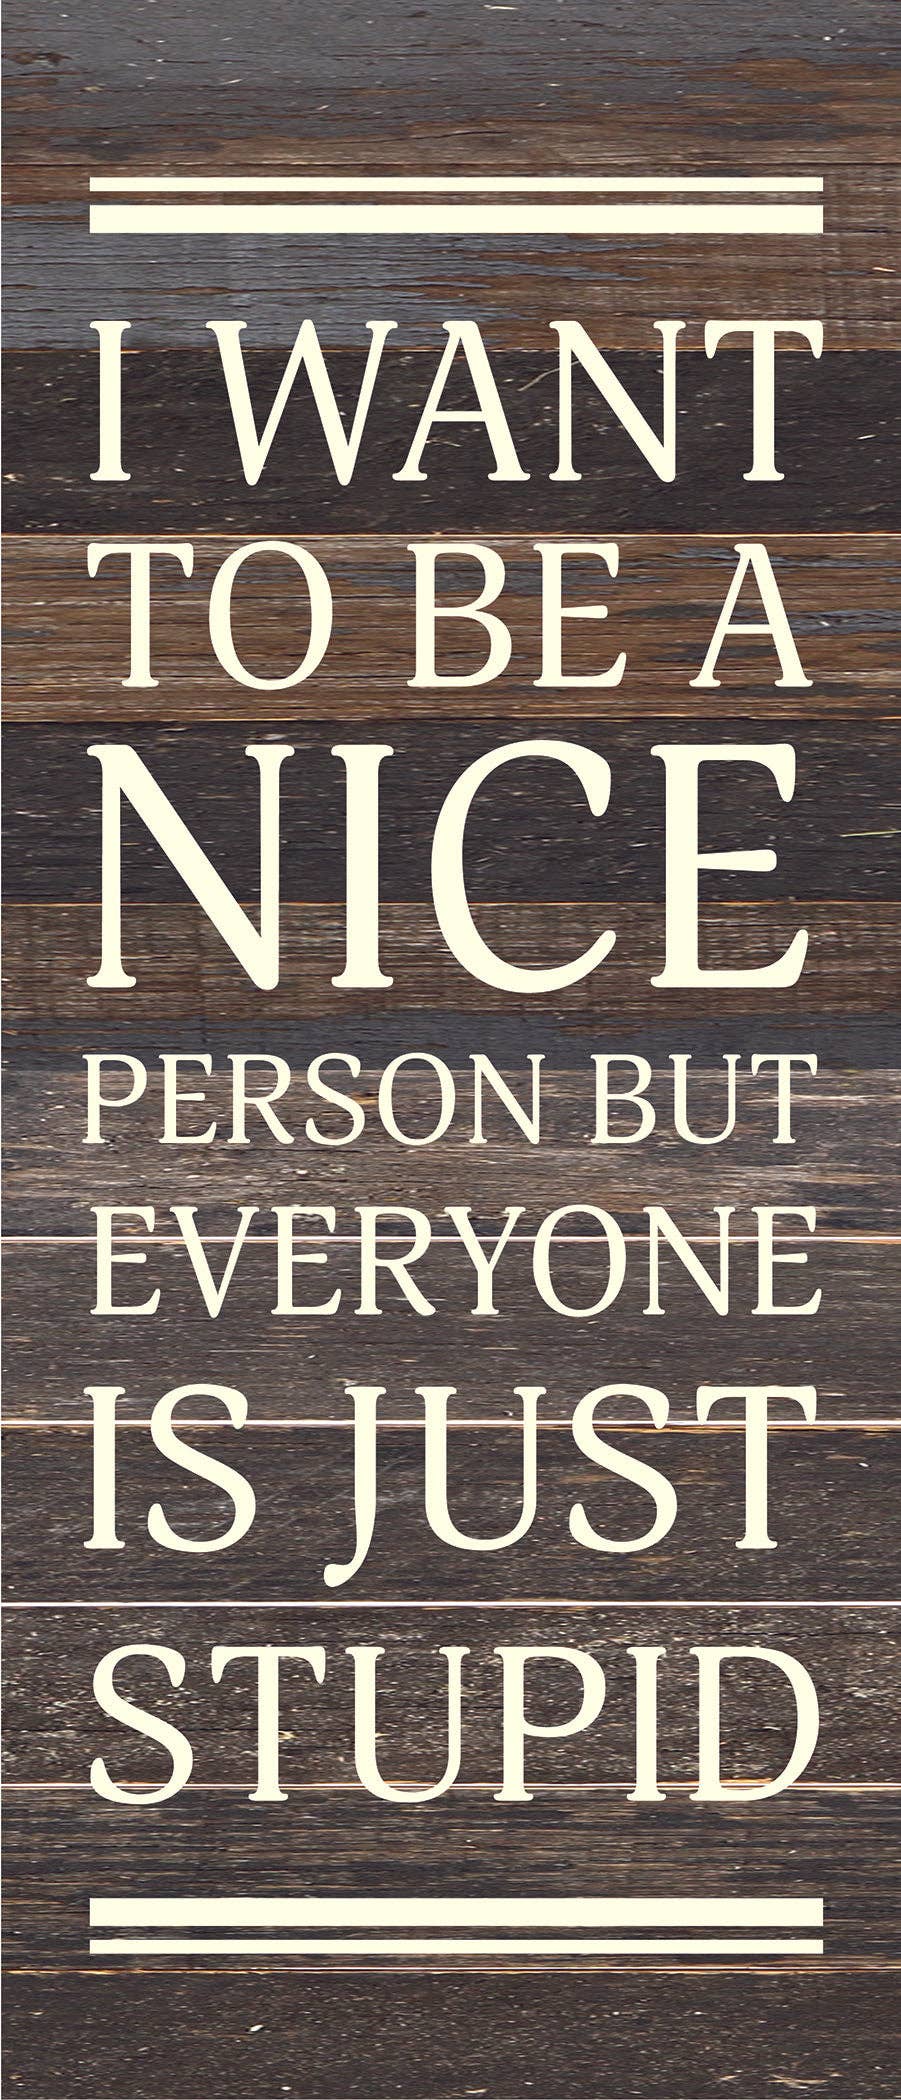 I want to be a nice person but everyone... 6x14 Wood Sign: WR - White Reclaimed with Black Print